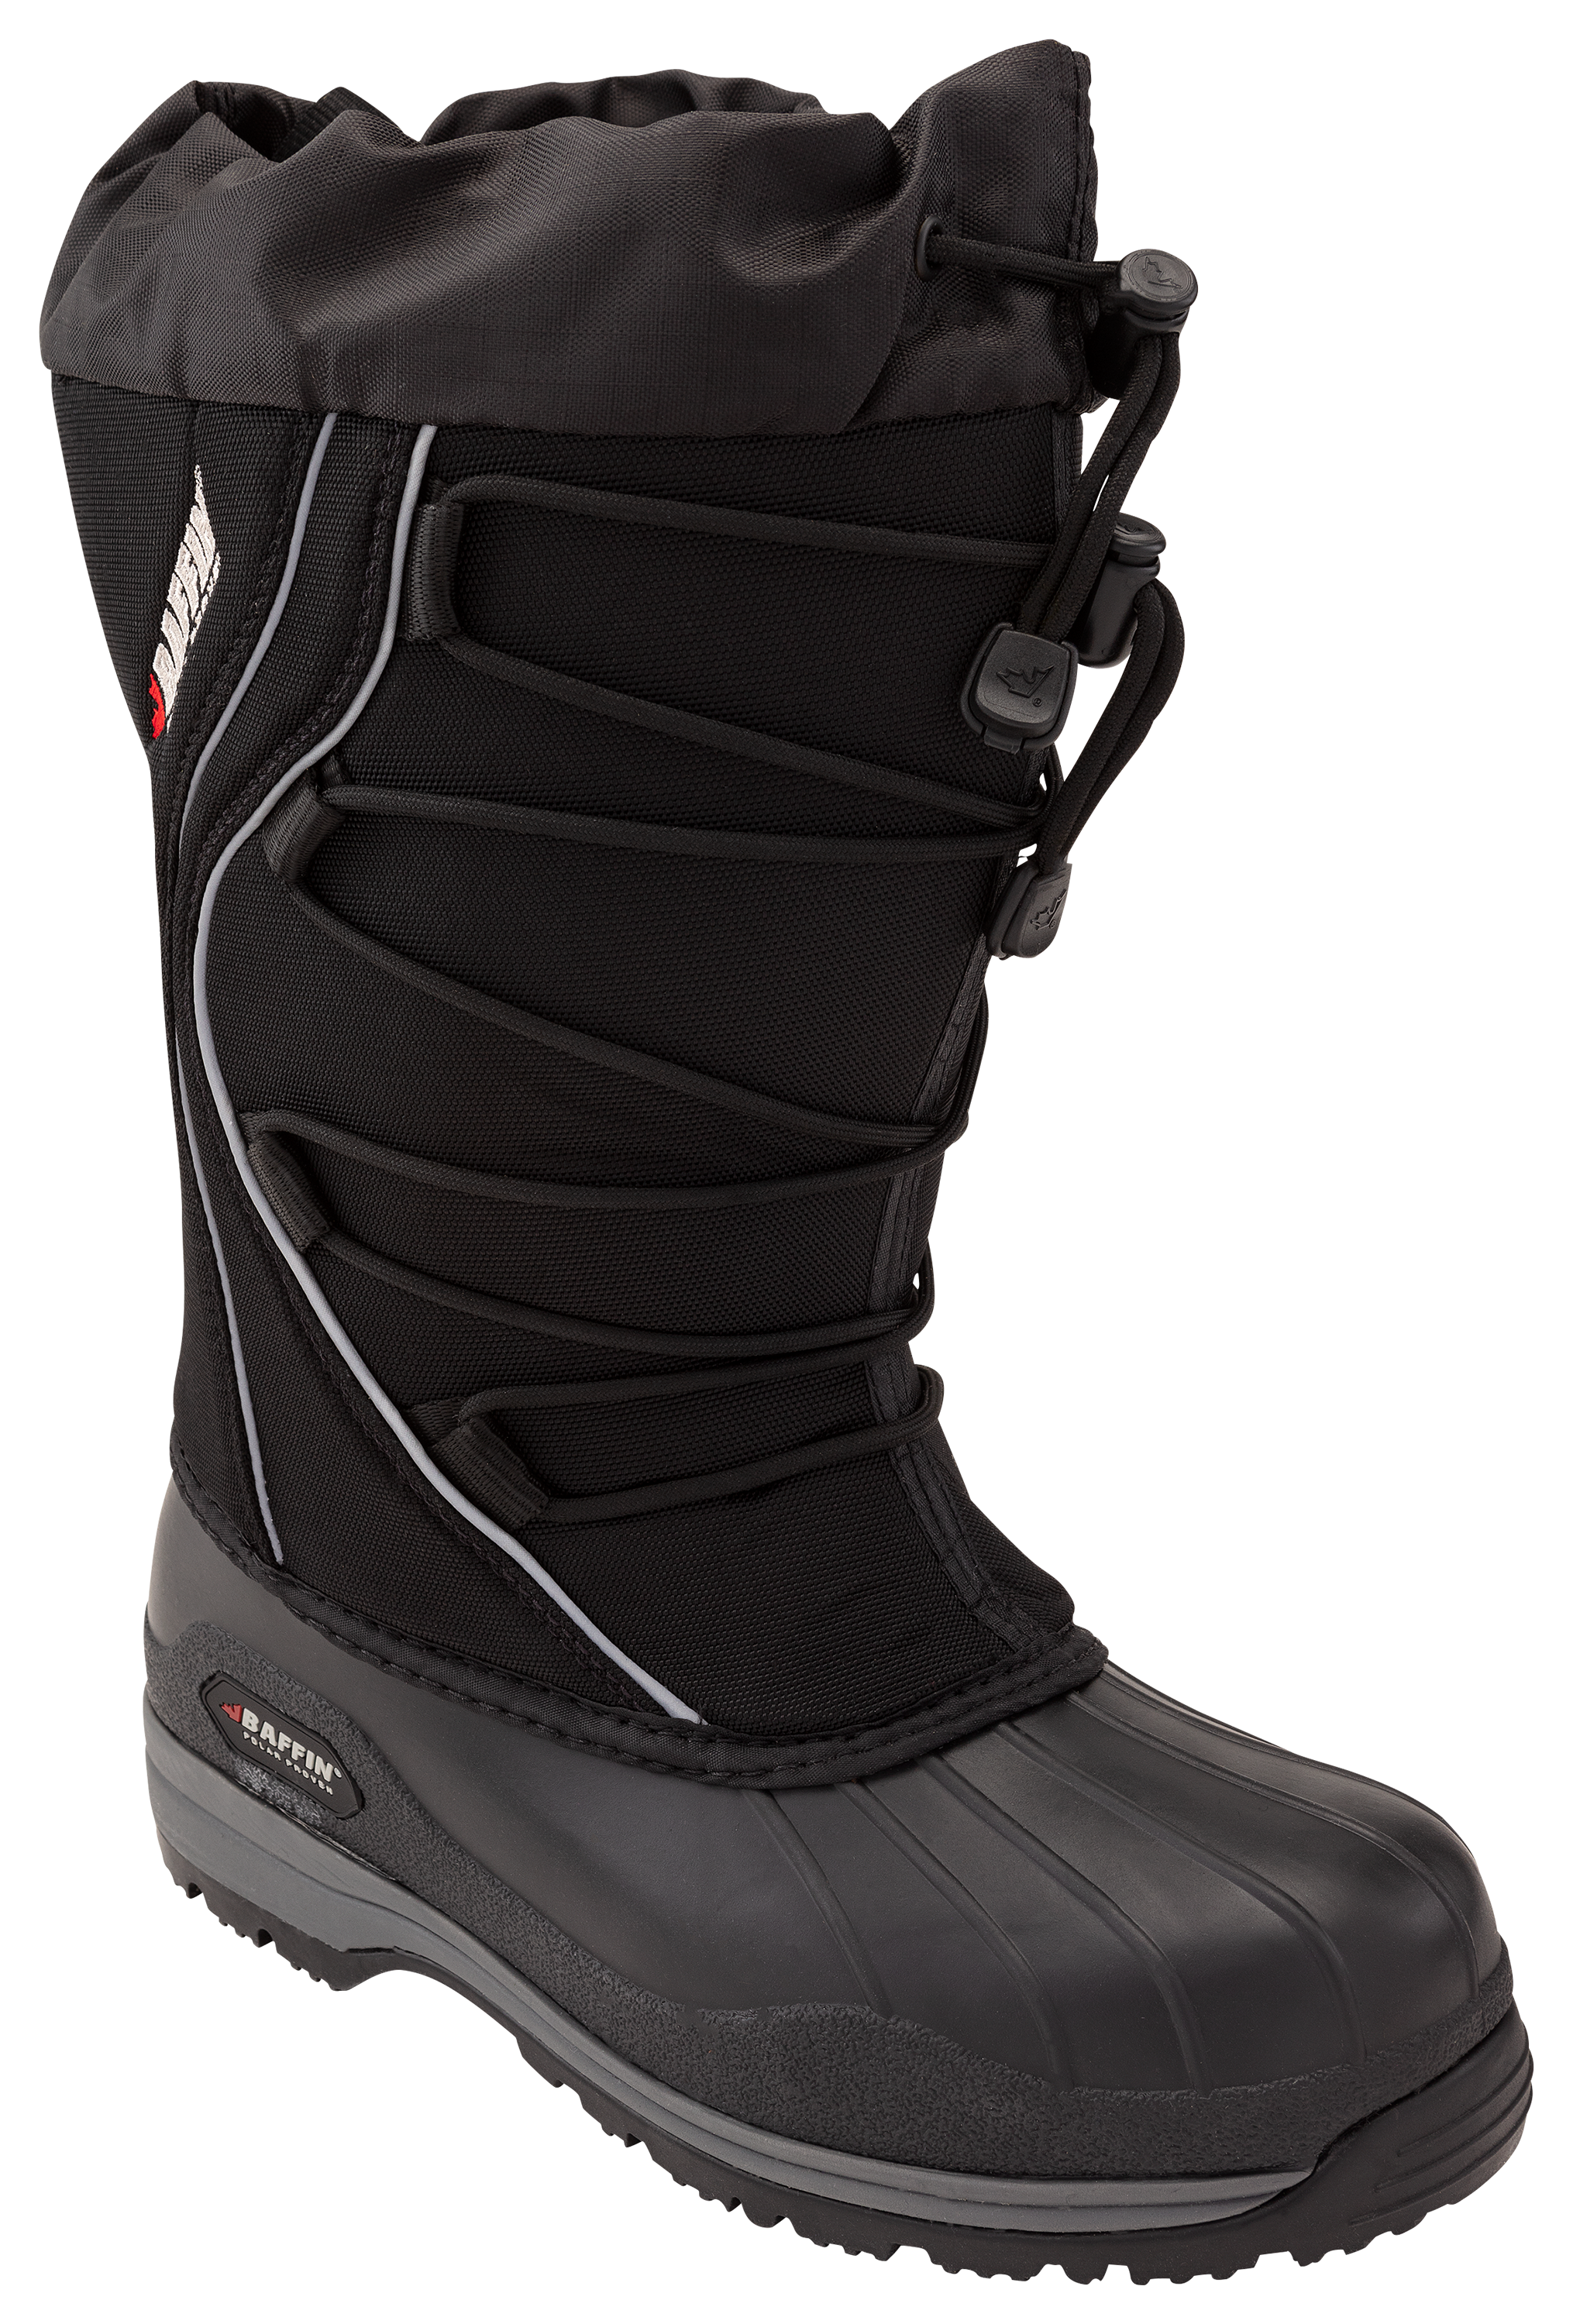 Baffin Icefield Pac Boots for Ladies - Black - 9M